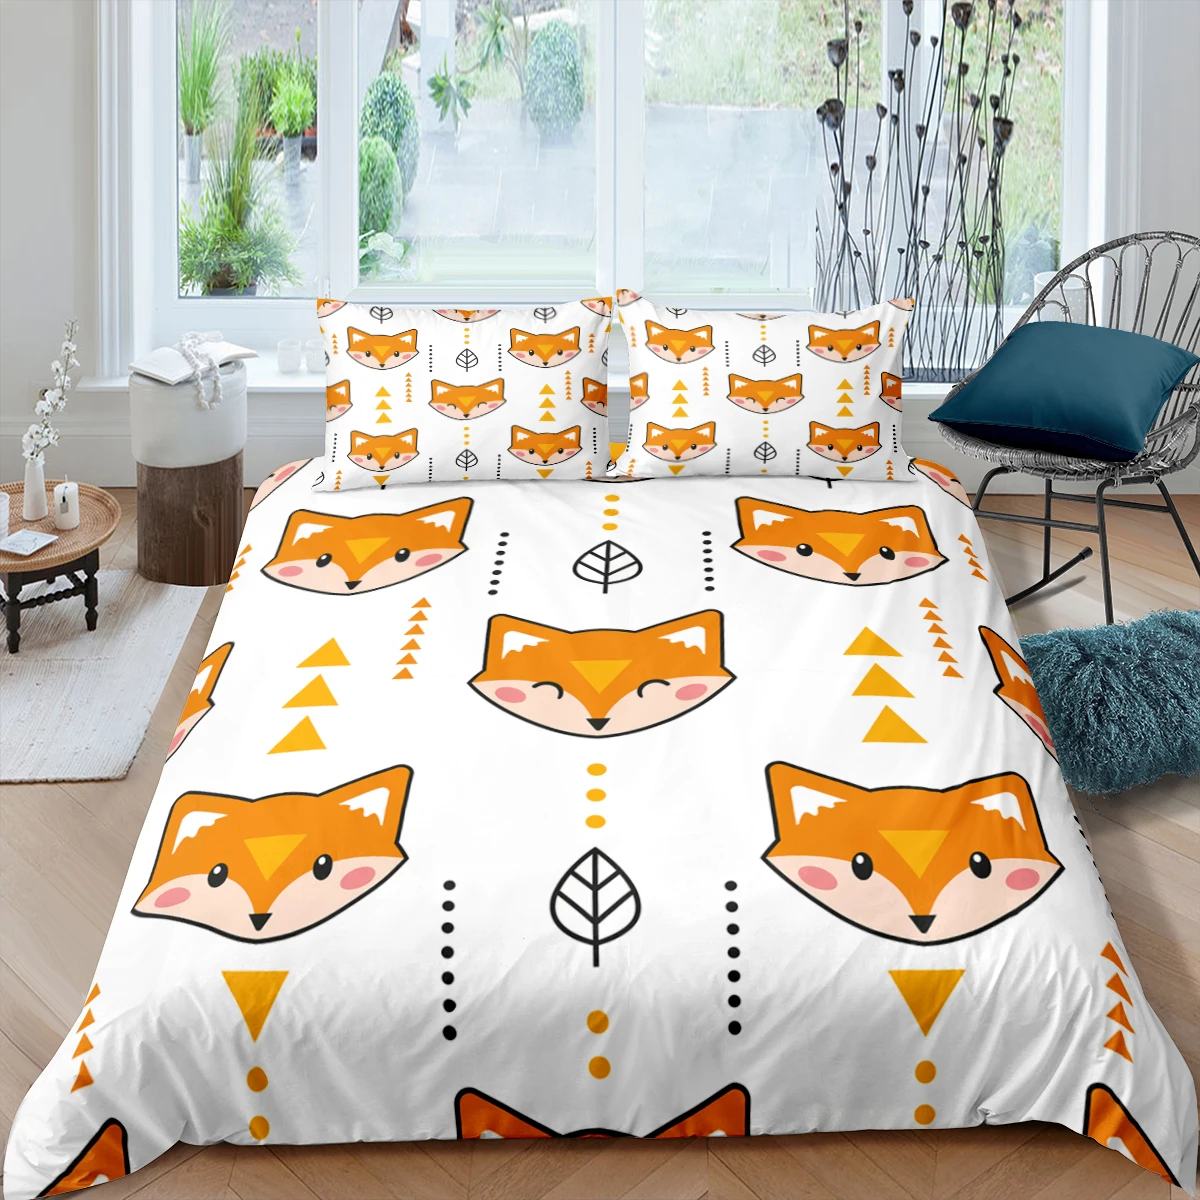 Home Textiles Luxury 3D Cartoon Fox Duvet Cover Set Pillowcase Animals Bedding Set Queen and King Size Comforter Bedding Sets best bed sheets Bedding Sets